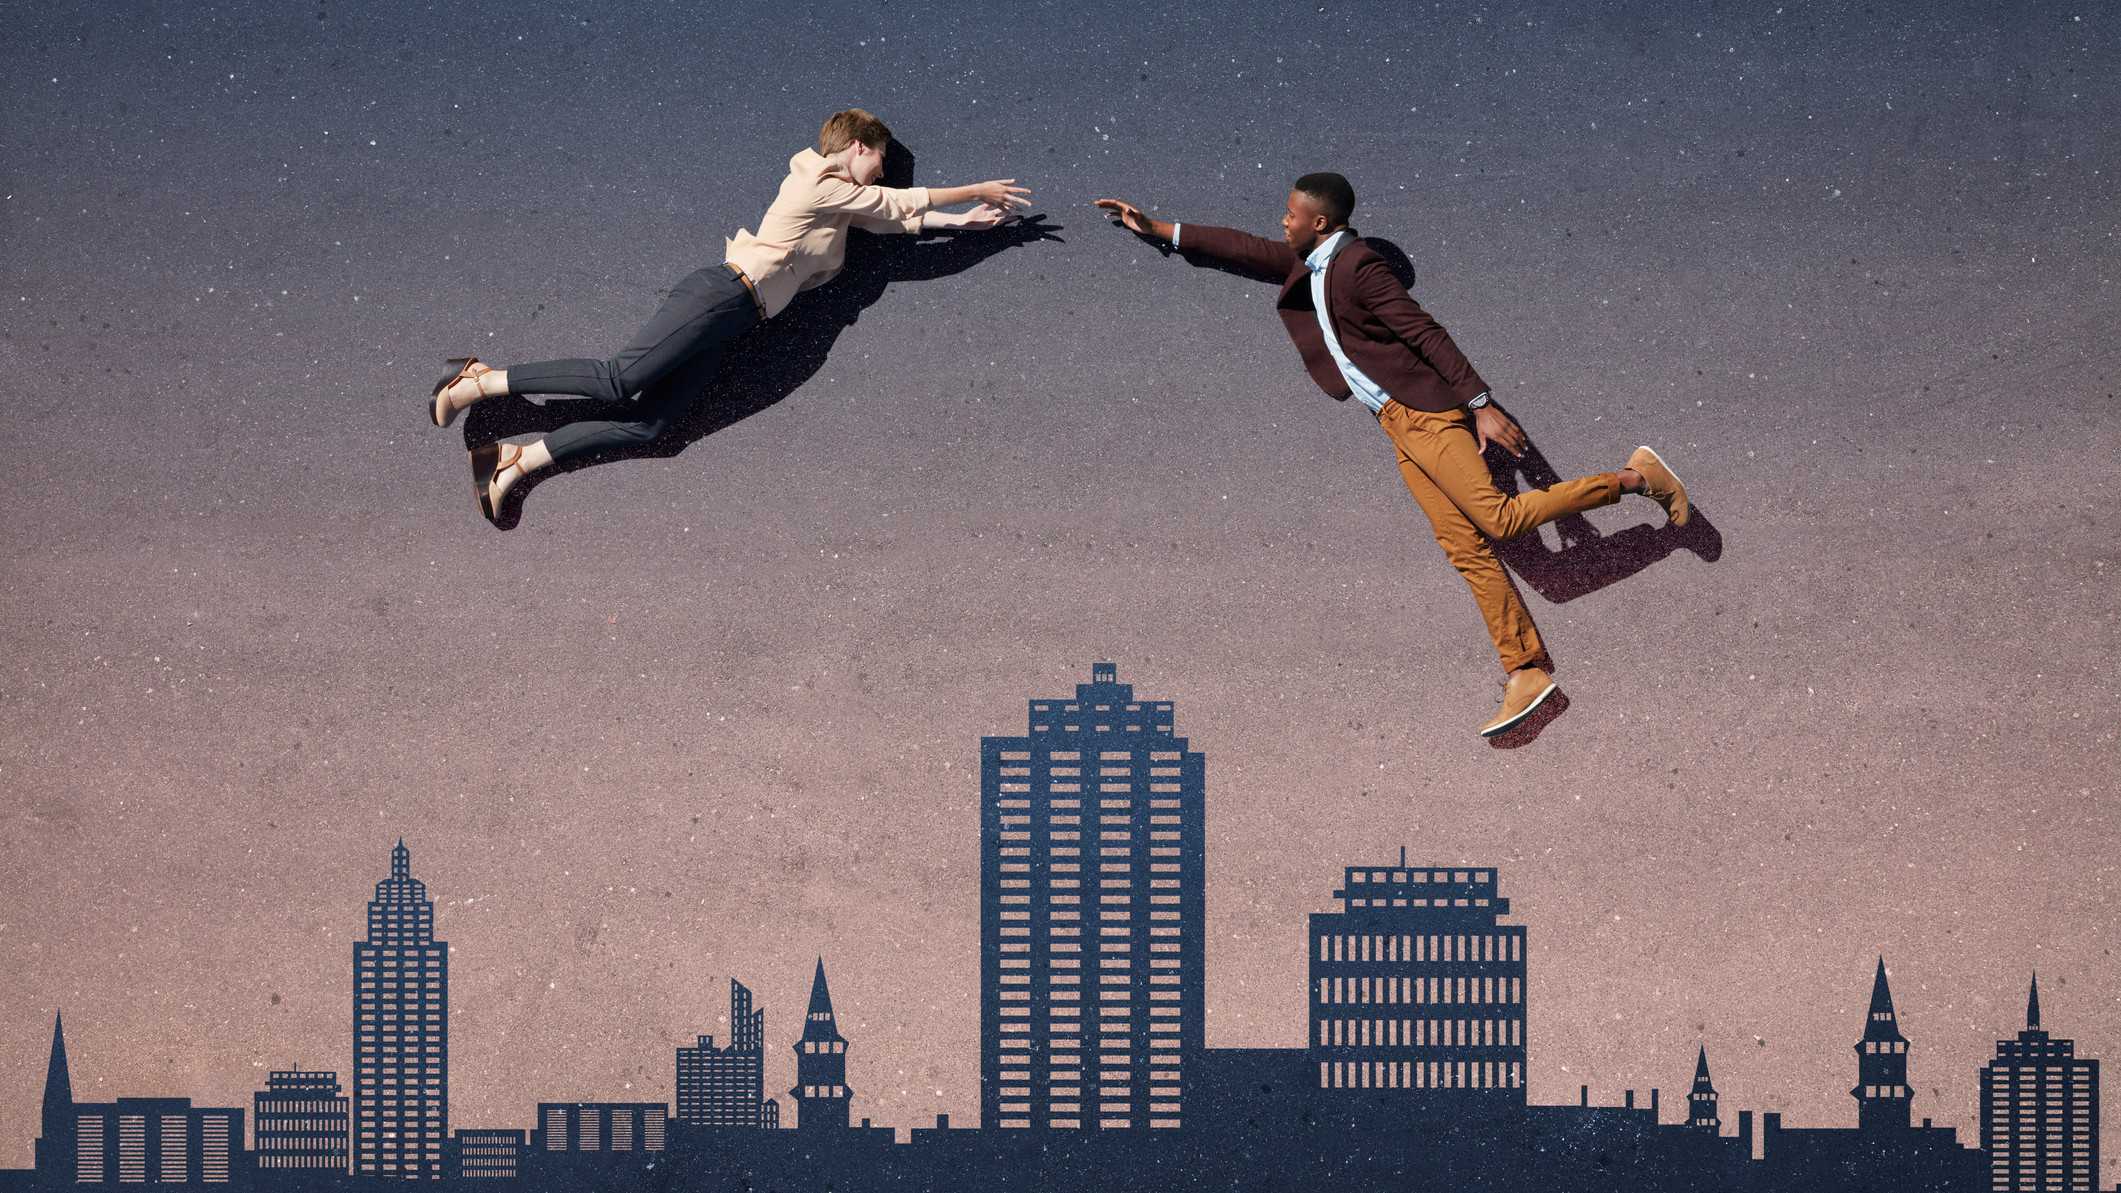 two people in business attire rise above the graphic image of a cityscape as if to join hands.